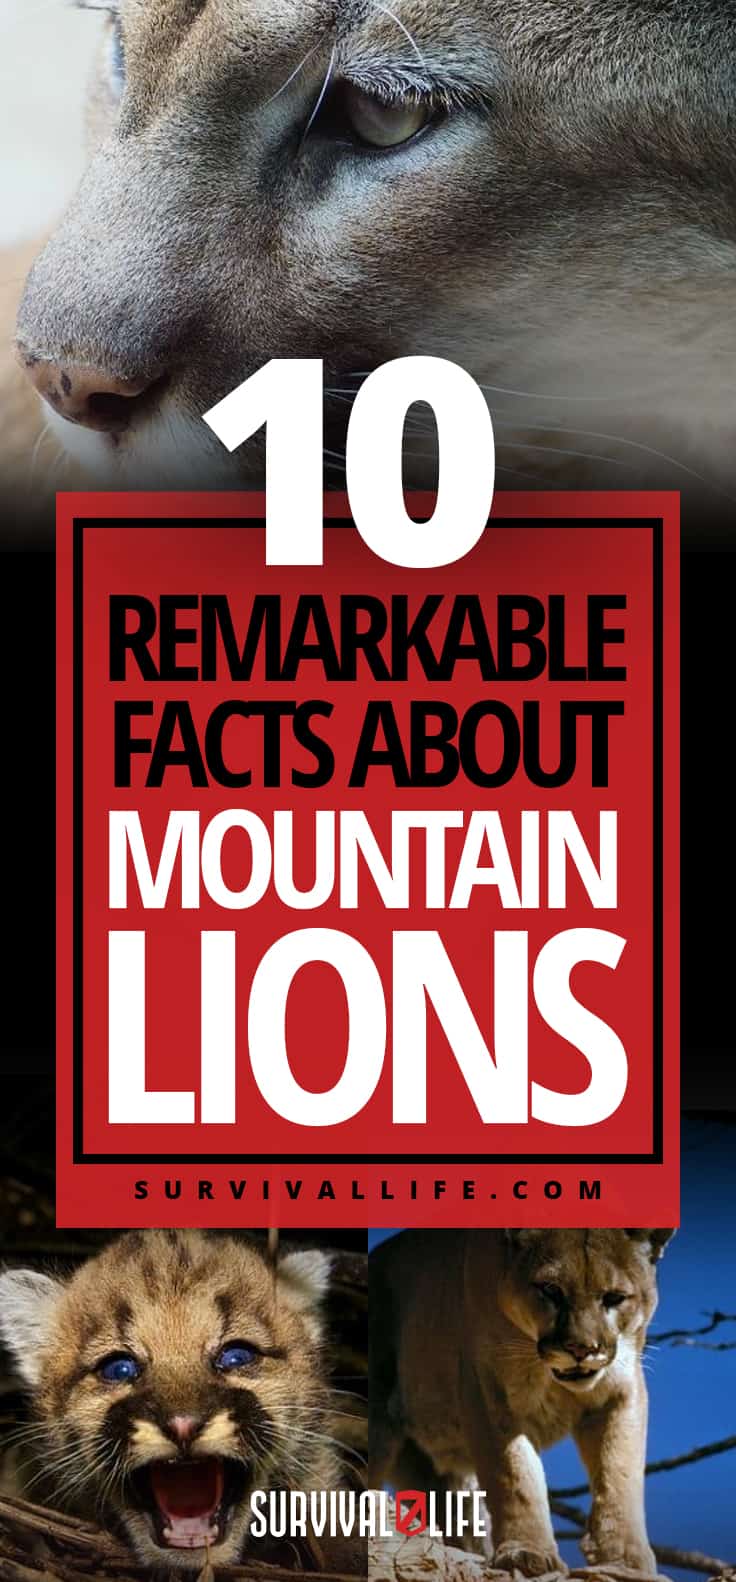 Remarkable Facts About Mountain Lions | https://survivallife.com/facts-about-mountain-lions/